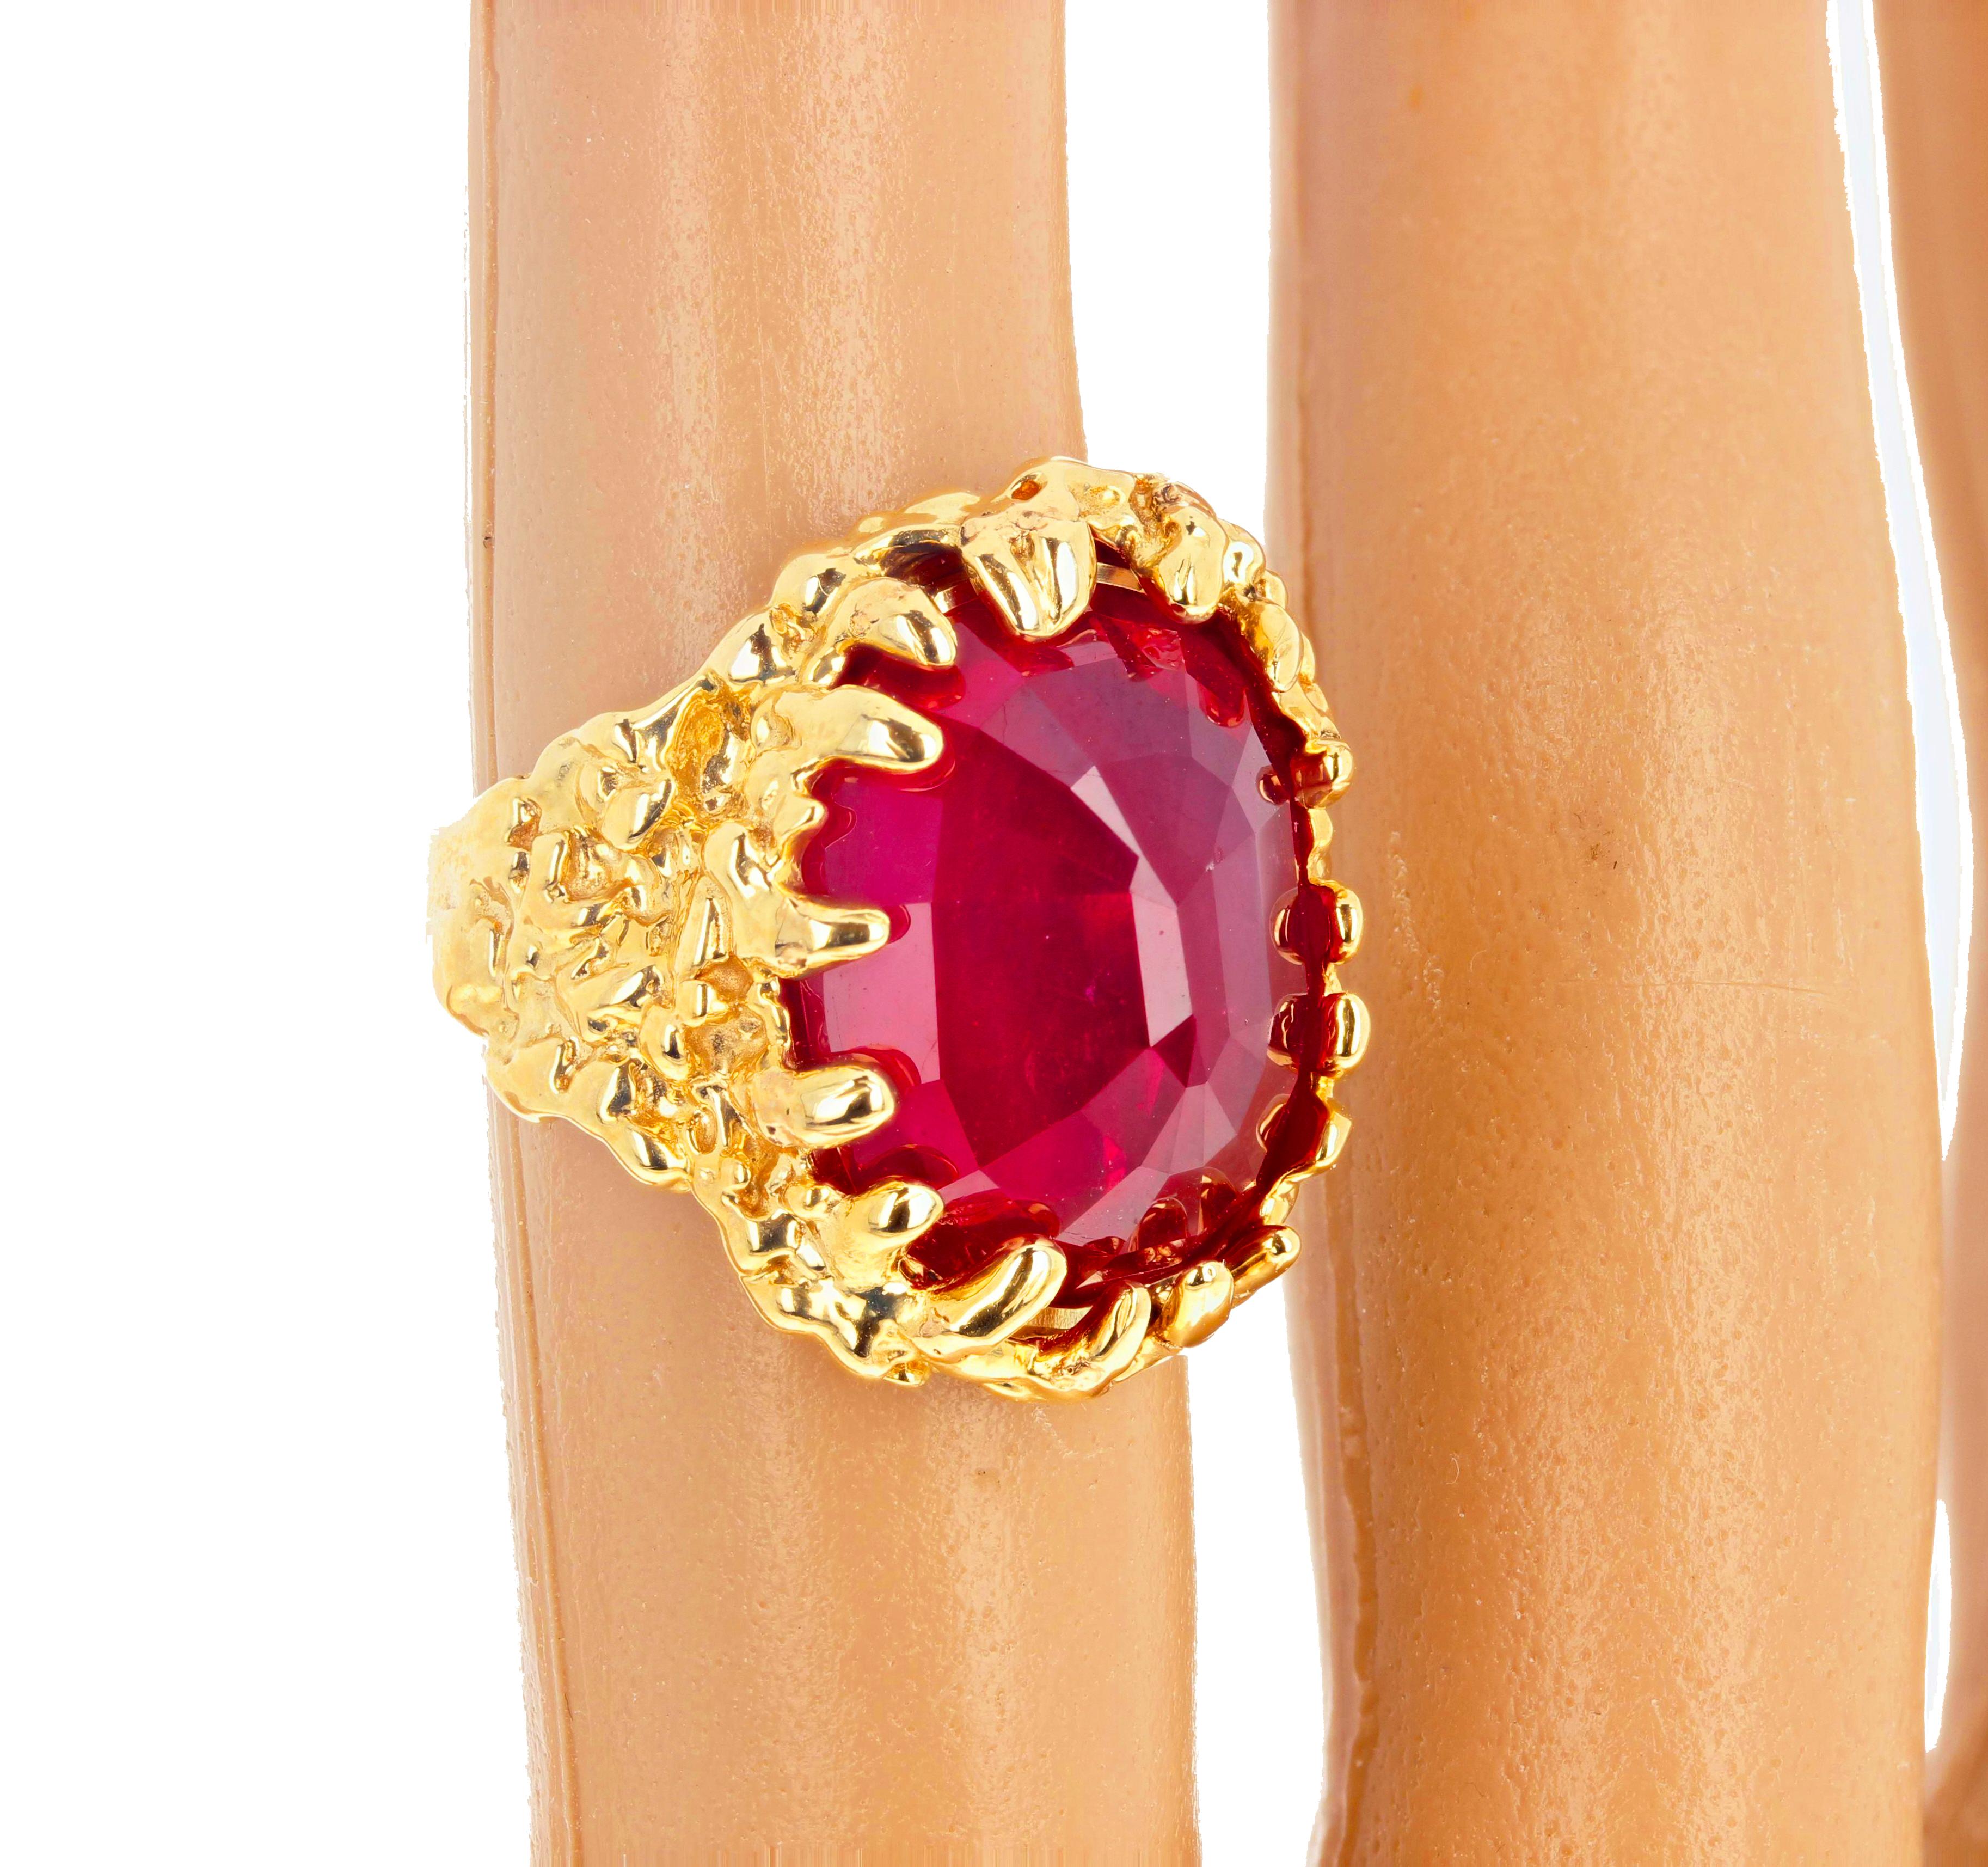 AJD Dramatic Impressive Huge 14 Ct. Ruby in 14 Kt Yellow Gold Cocktail Ring In New Condition For Sale In Raleigh, NC